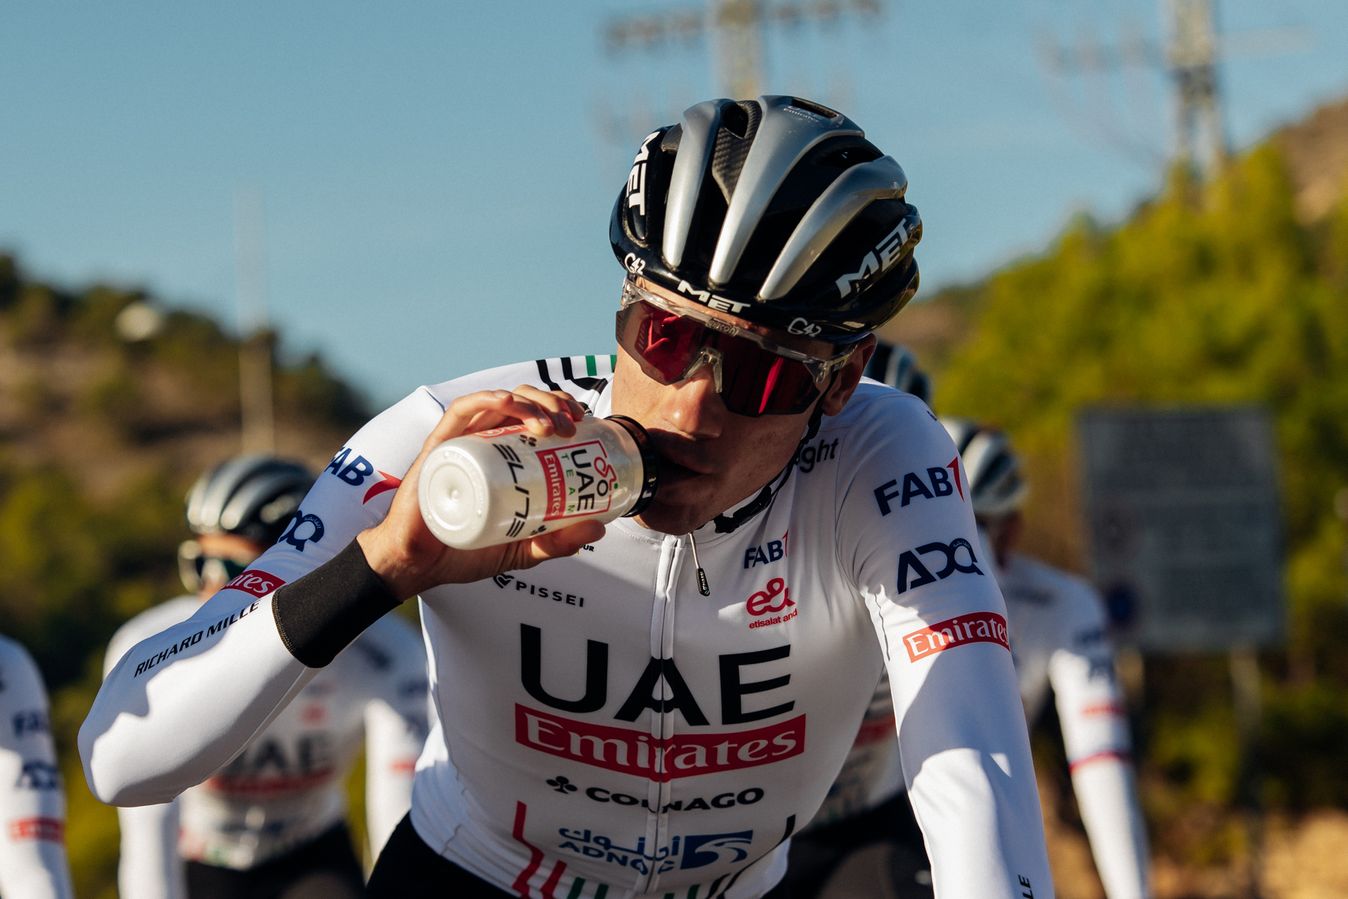 Ayuso emerged as one of UAE Team Emirates' main riders at team camp over the winter